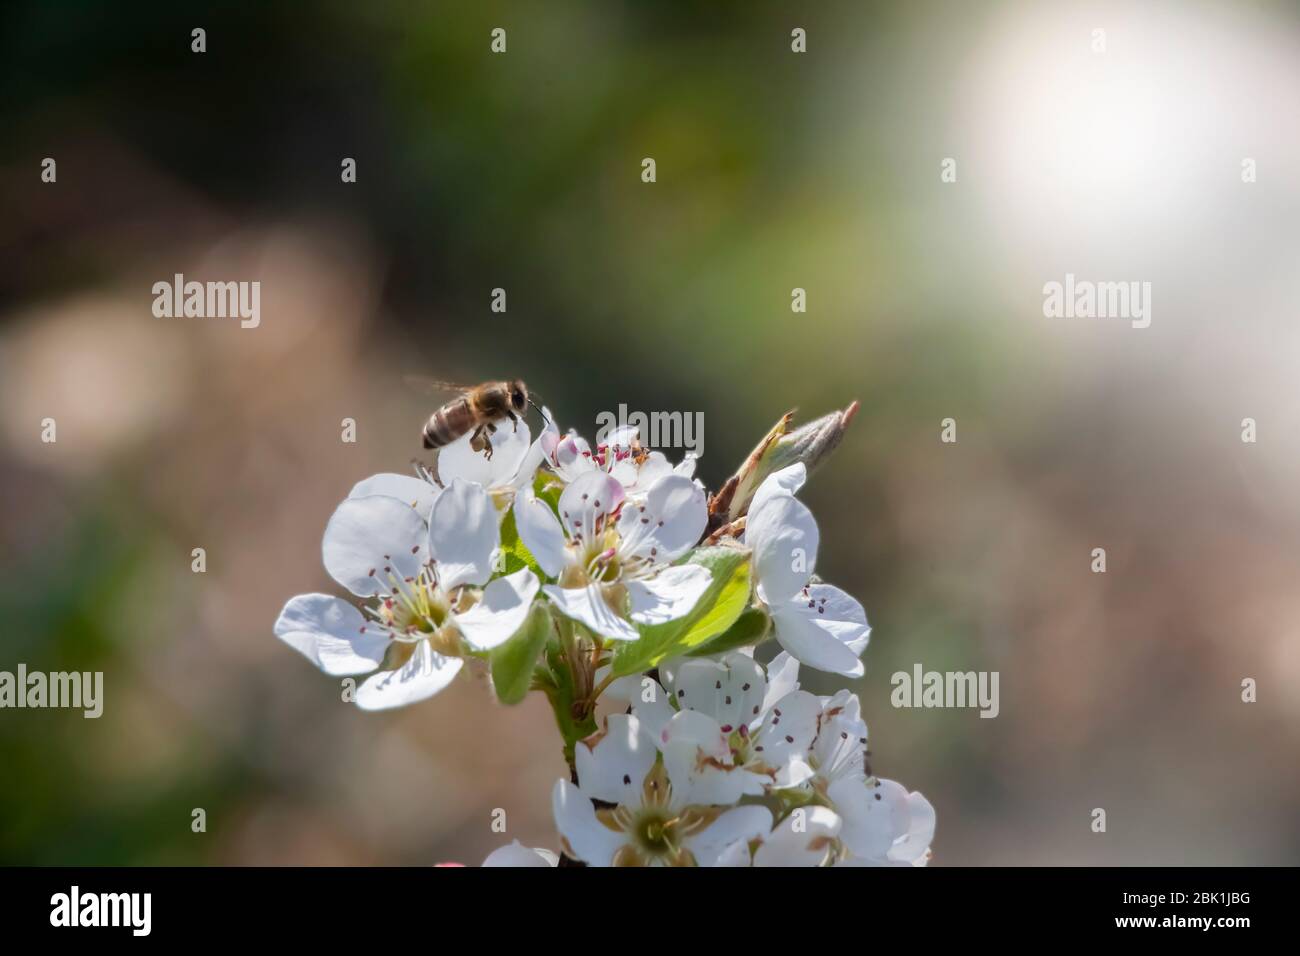 A Bee with Full Honey Bags on His Feet During the Flight Over the Pear Flower Stock Photo